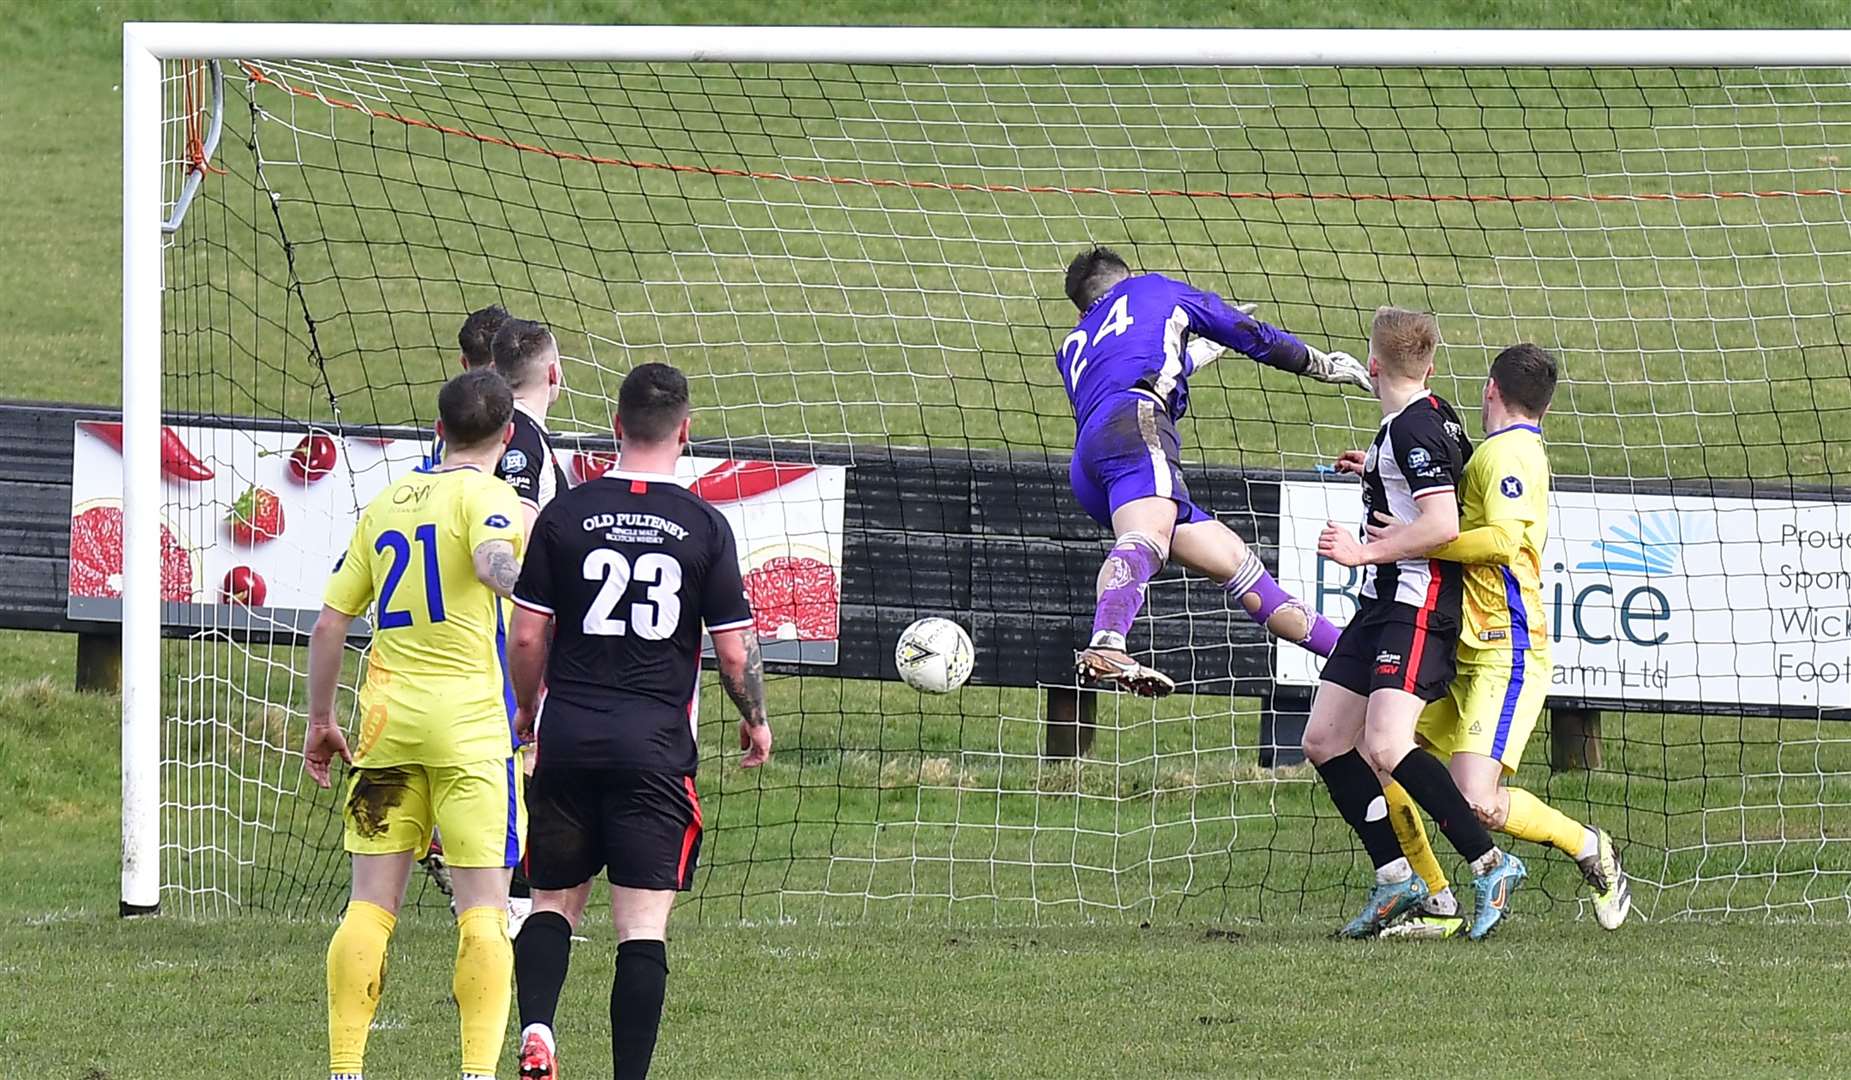 Kyle Henderson's wind-assisted corner kick flies past Buckie keeper Tom Ritchie to give the Scorries a two-goal lead. Picture: Mel Roger